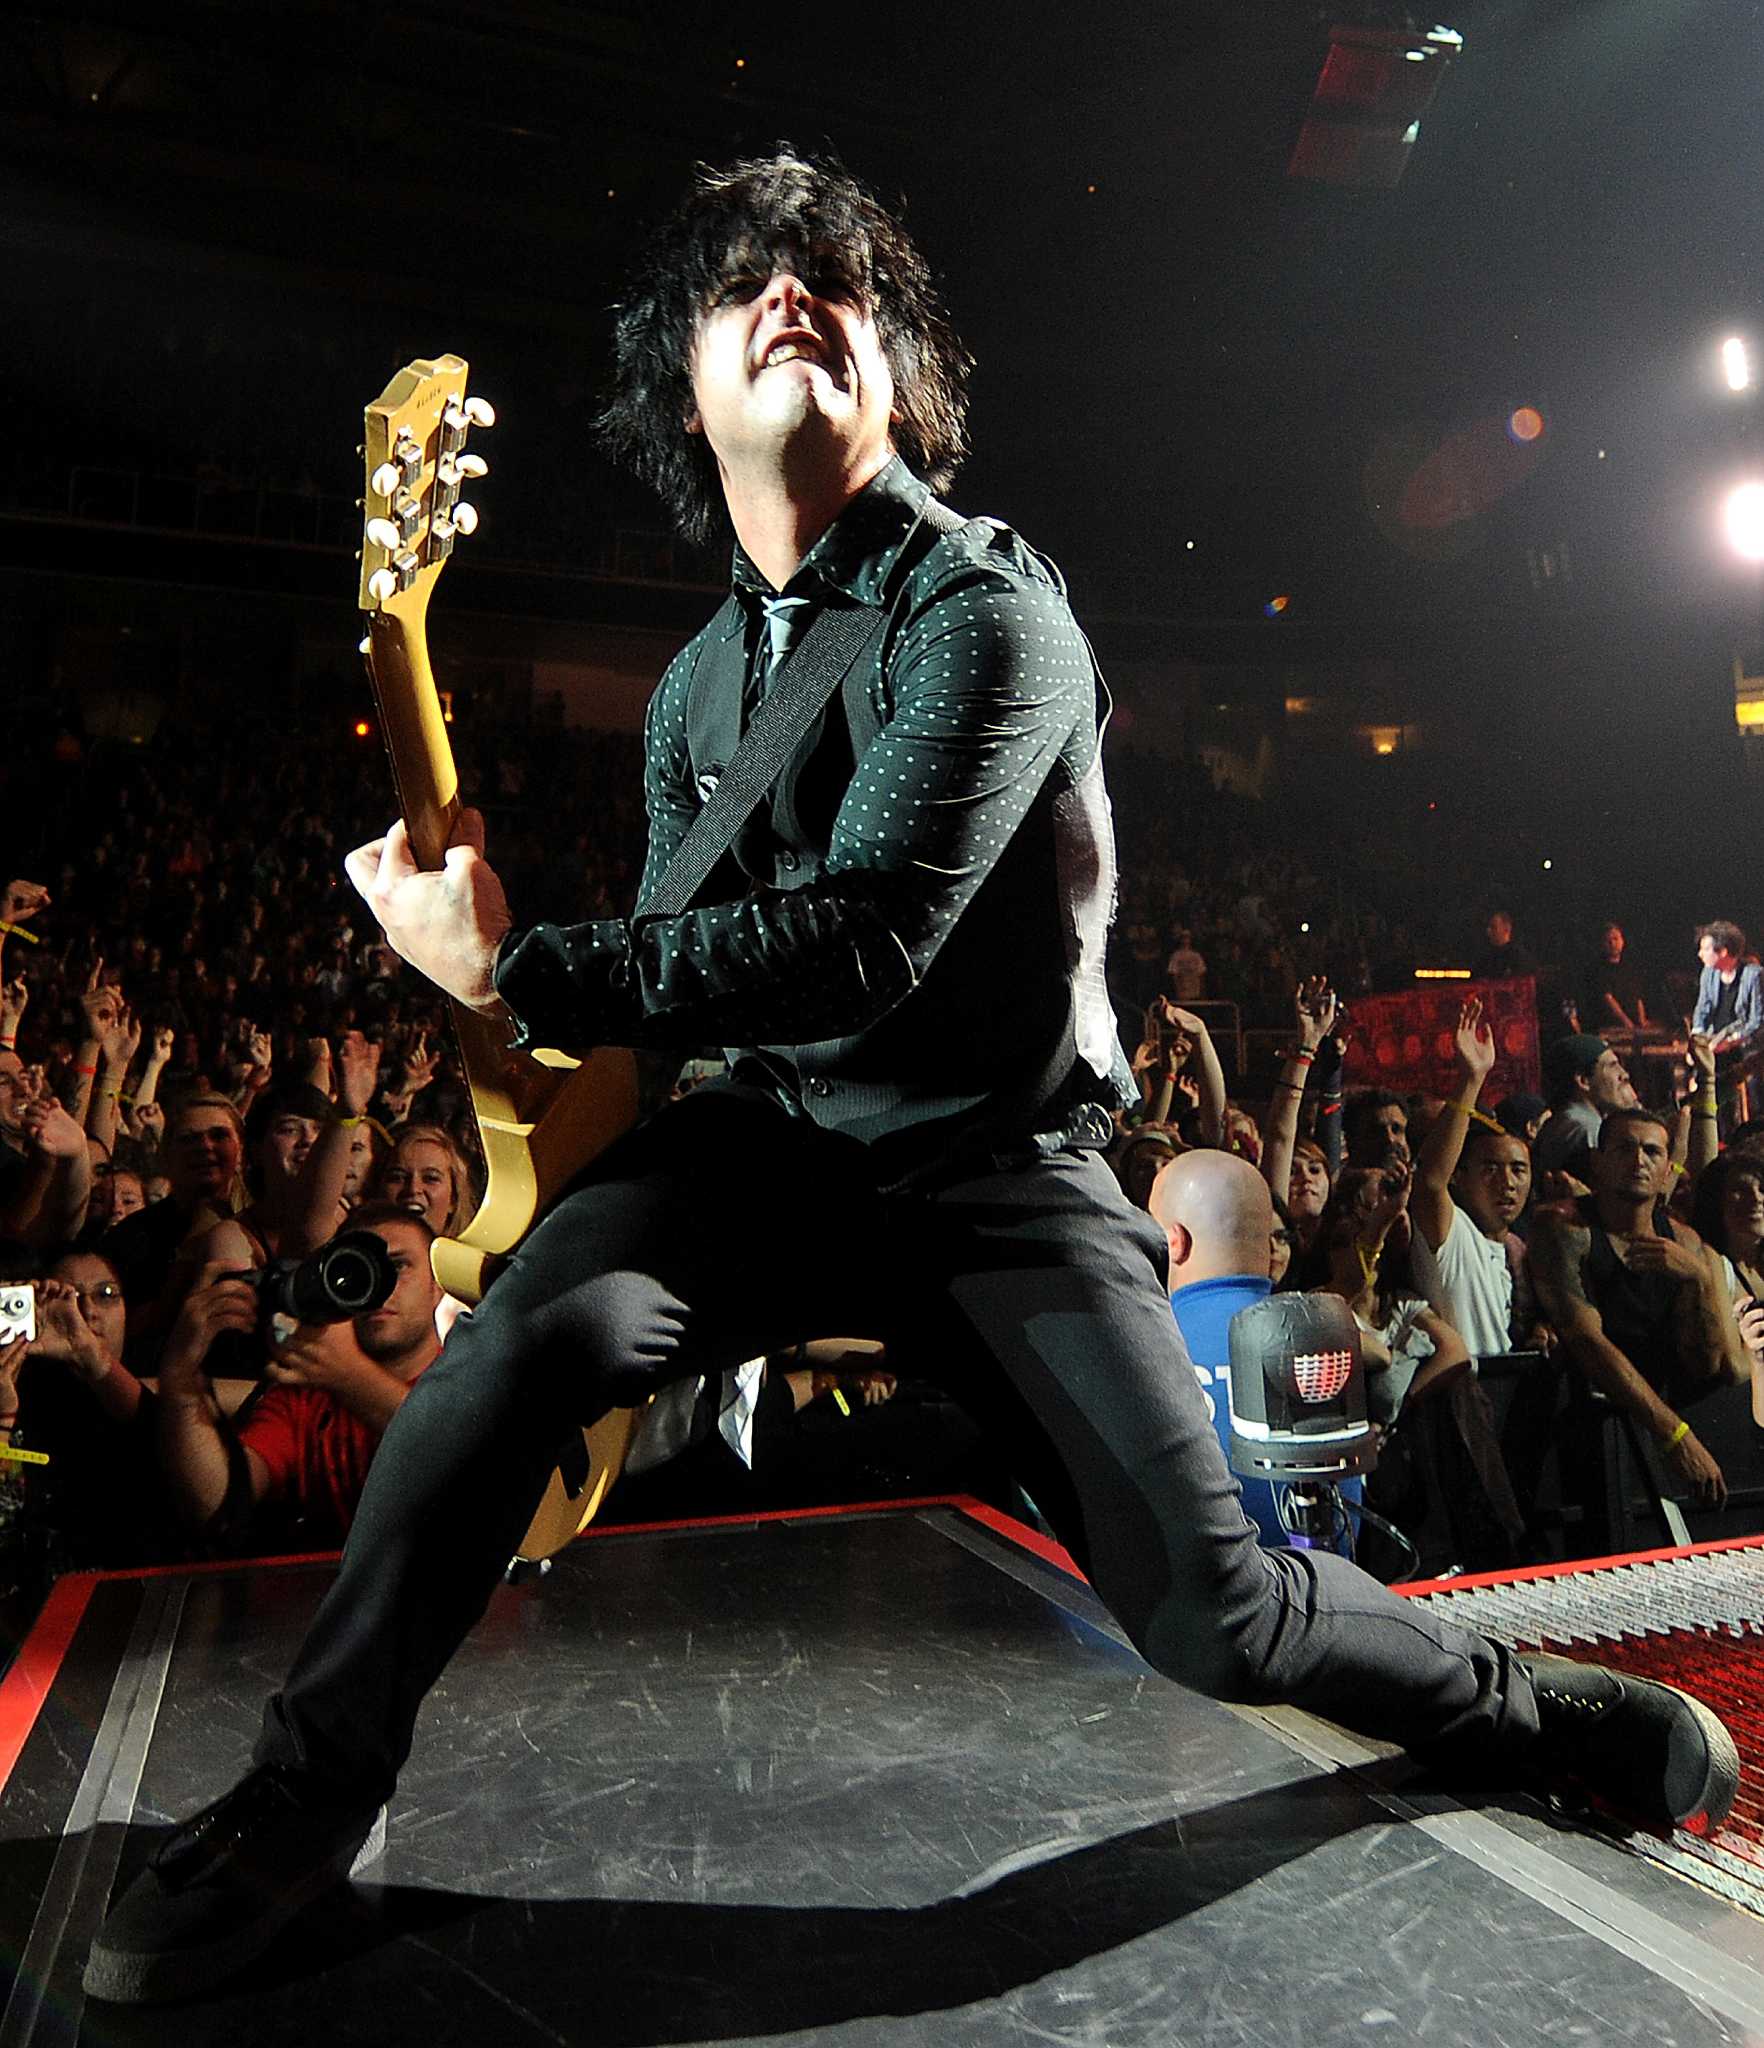 Green Day's Billie Joe Armstrong compares Donald Trump to Hitler